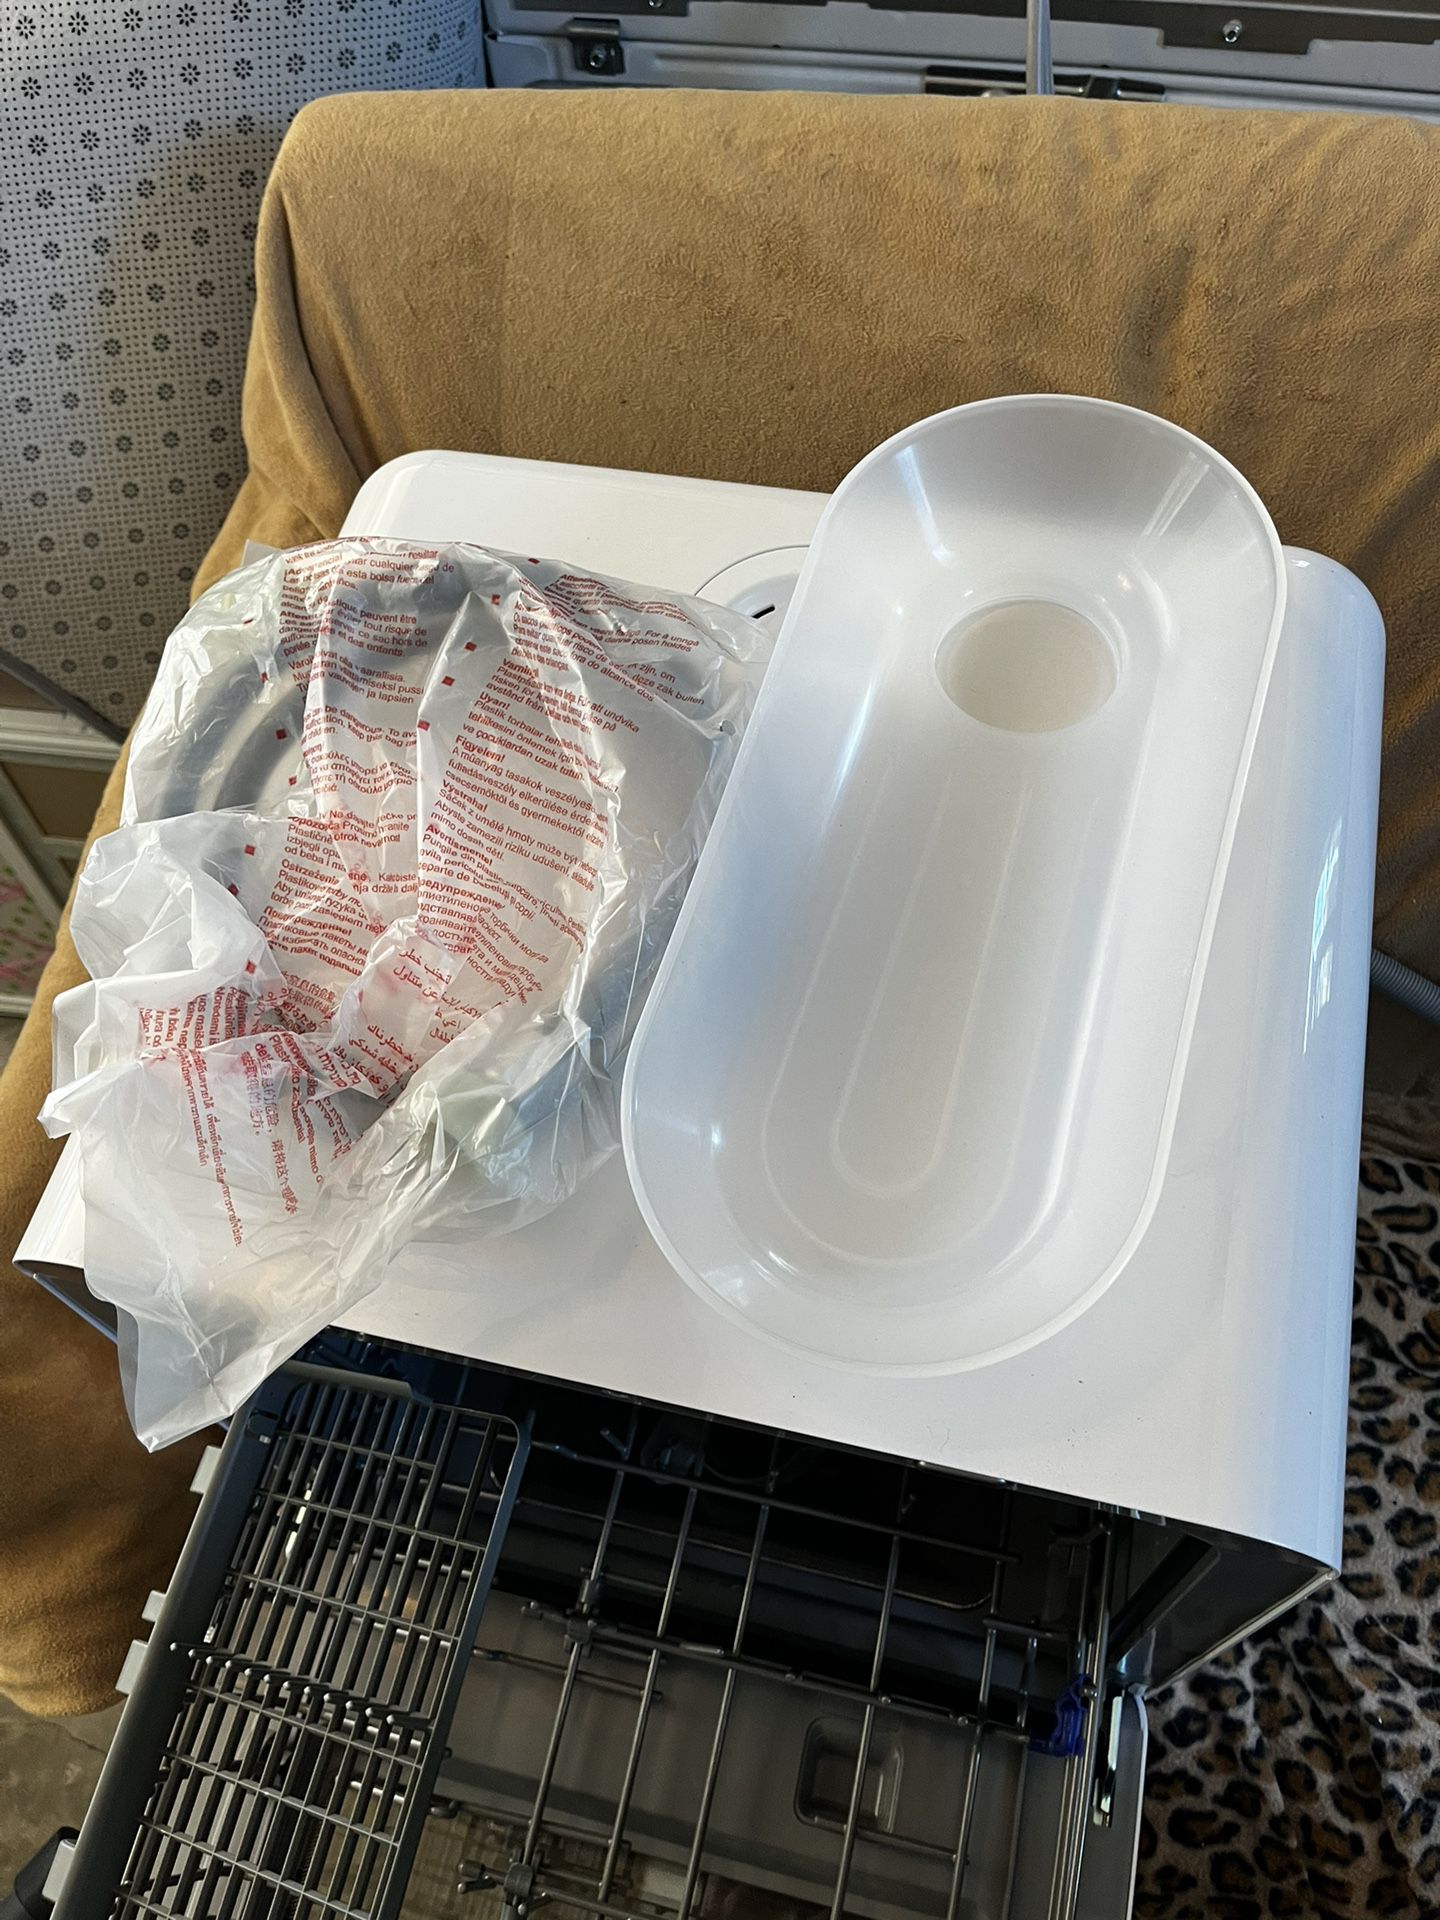 Novete Countertop Dishwasher for Sale in San Mateo, CA - OfferUp